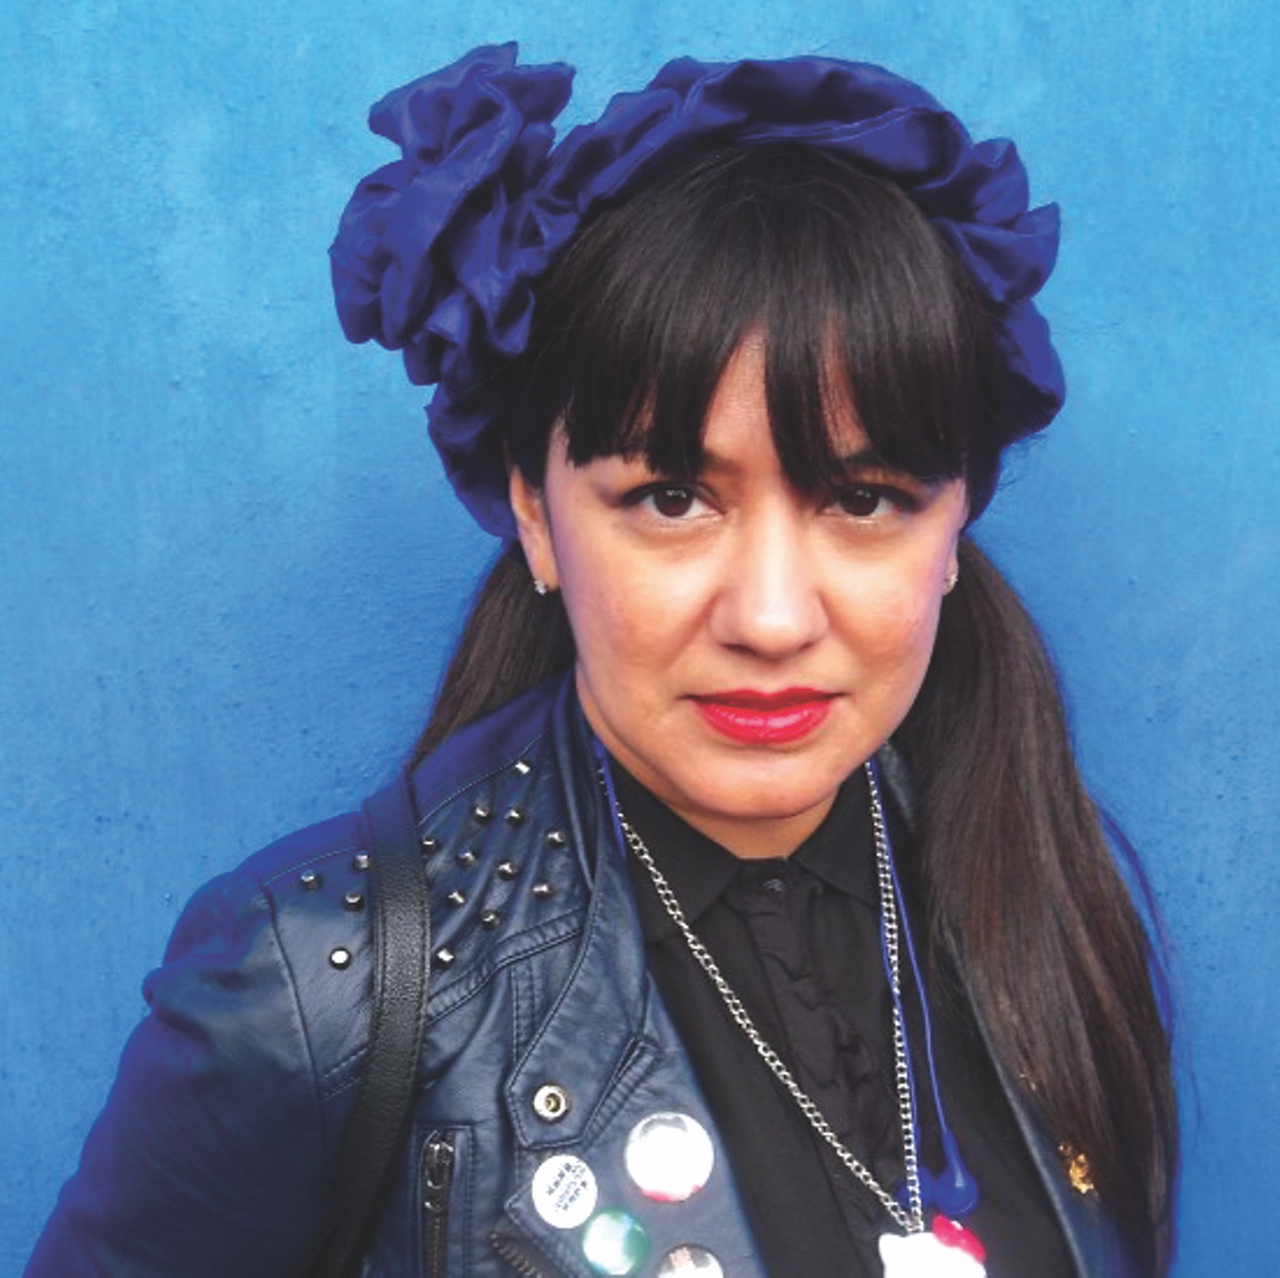 Amalia Ortiz
Amalia Ortiz has worked on projects like Def Poetry, Carmen de la Calle, Cancion Canibal Cabaret, and Speeder Kills. Besides that, her debut book of poetry, Rant, Chant, Chisme won one of NBC’s 10 great Latino books.
Photo courtesy of Amalia Ortiz